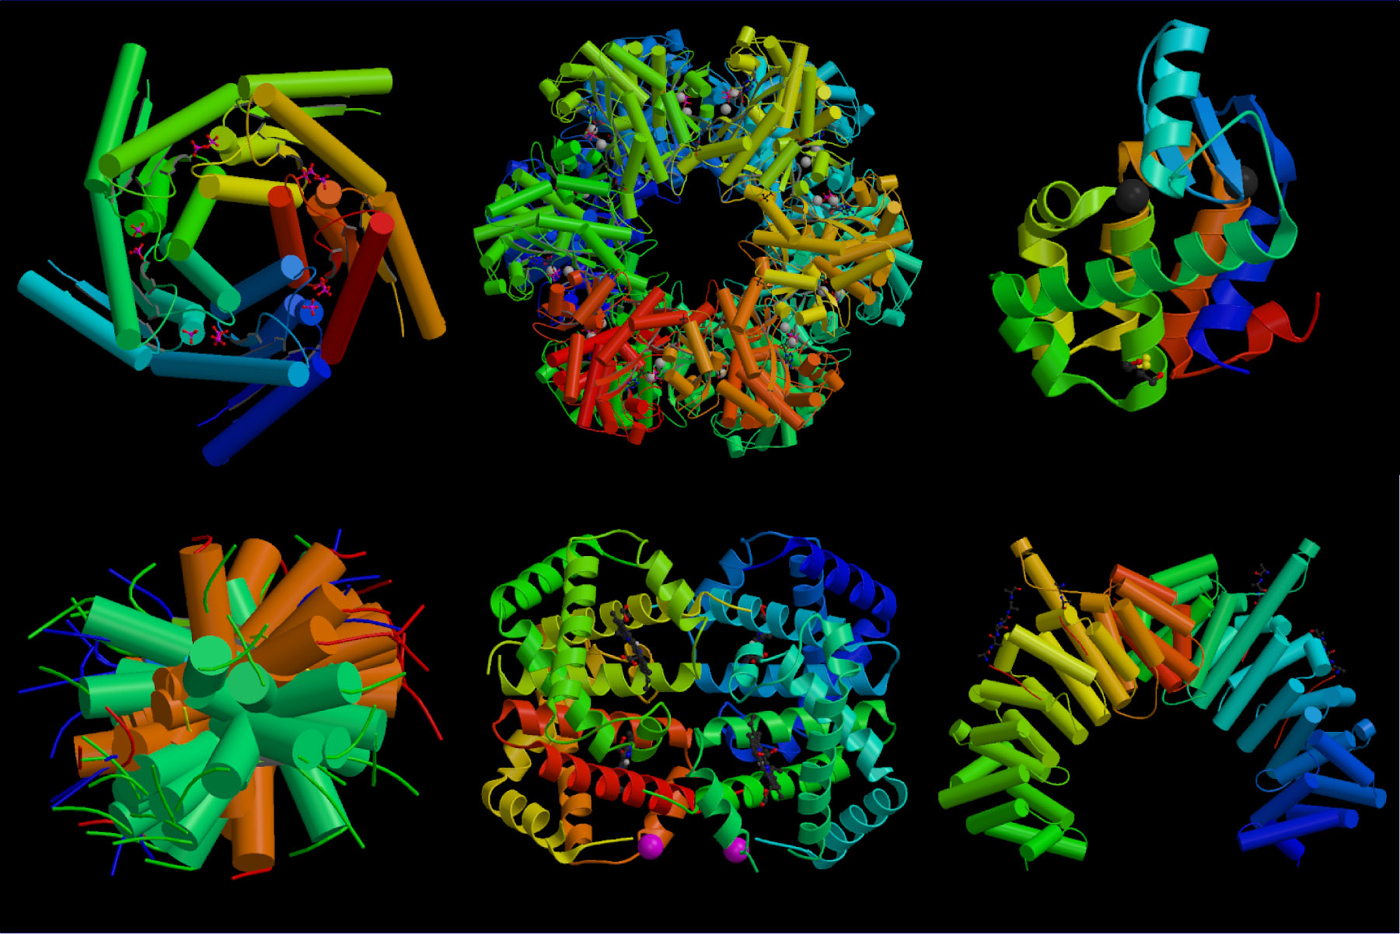 In 2011, people playing Foldit, an online puzzle game about protein 

folding, resolved the structure of an enzyme that causes an Aids-like 

disease in monkeys. Researchers had been working on the problem for 

13 years. The gamers solved it in three weeks.